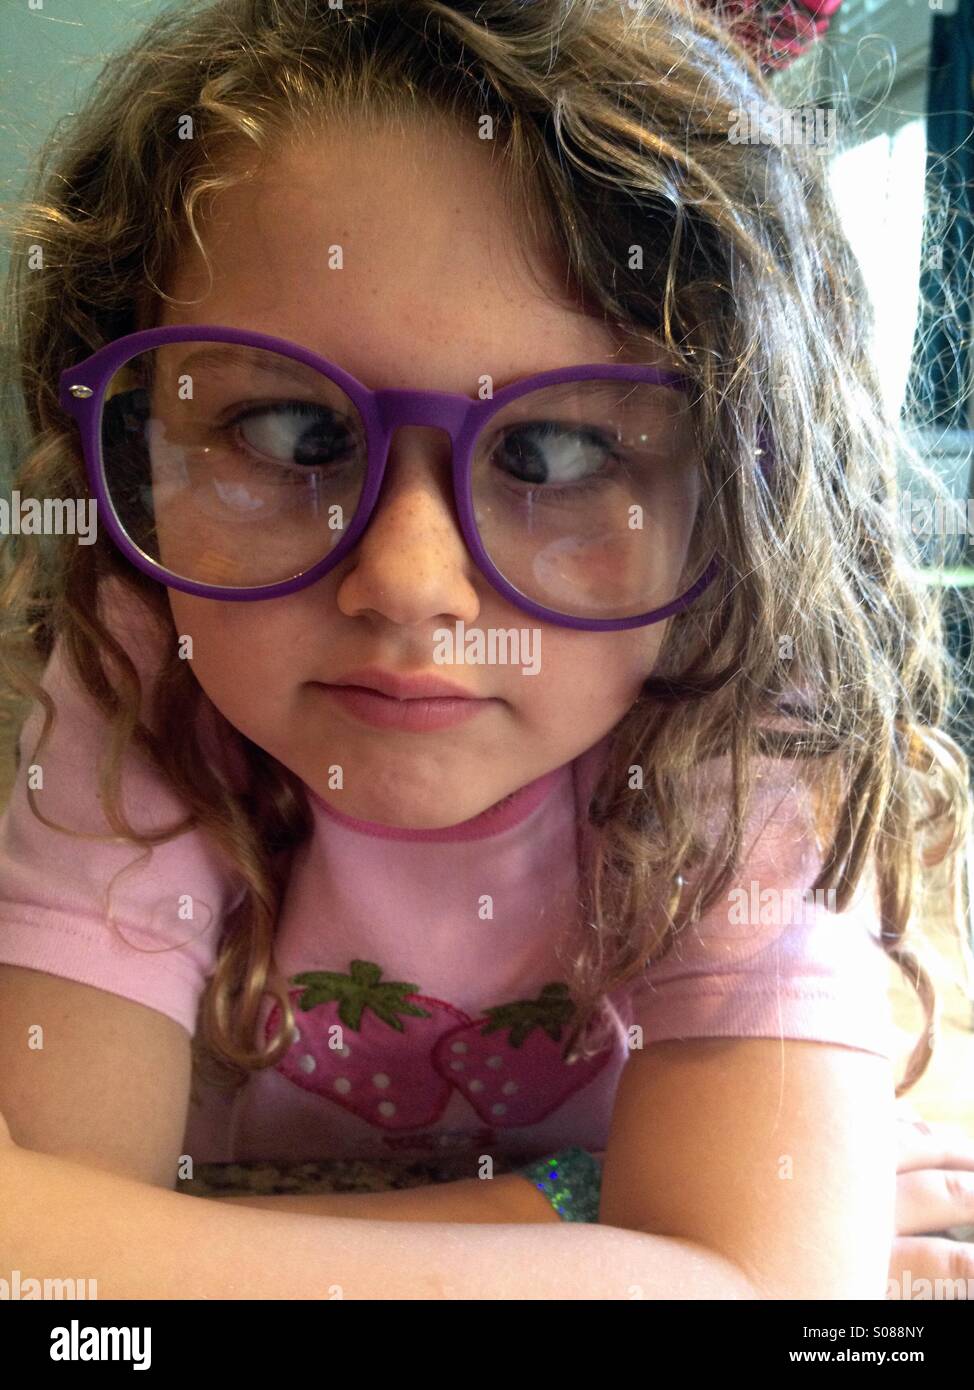 Young girl wearing big glasses and playing cross eyed. Stock Photo